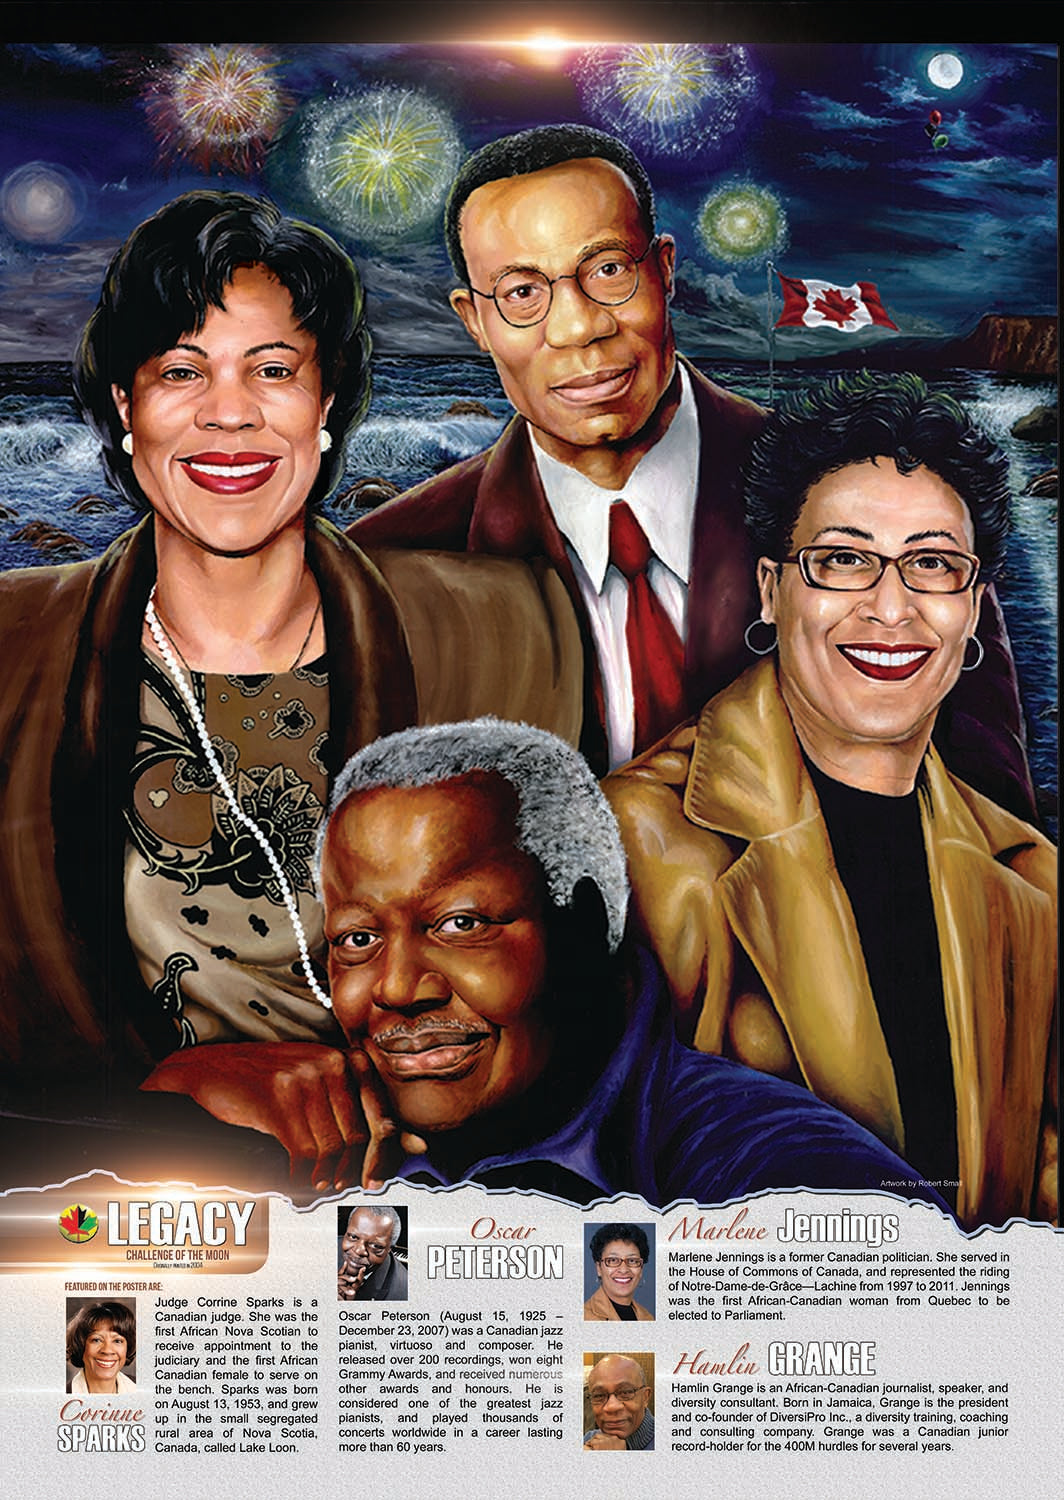 “An educational poster, ideal for Black History Month featuring judge Corrine Sparks, journalist Hamlin Grange, politician Marlene Jennings and musician Oscar Peterson created by African-Canadian artist Robert Small.”